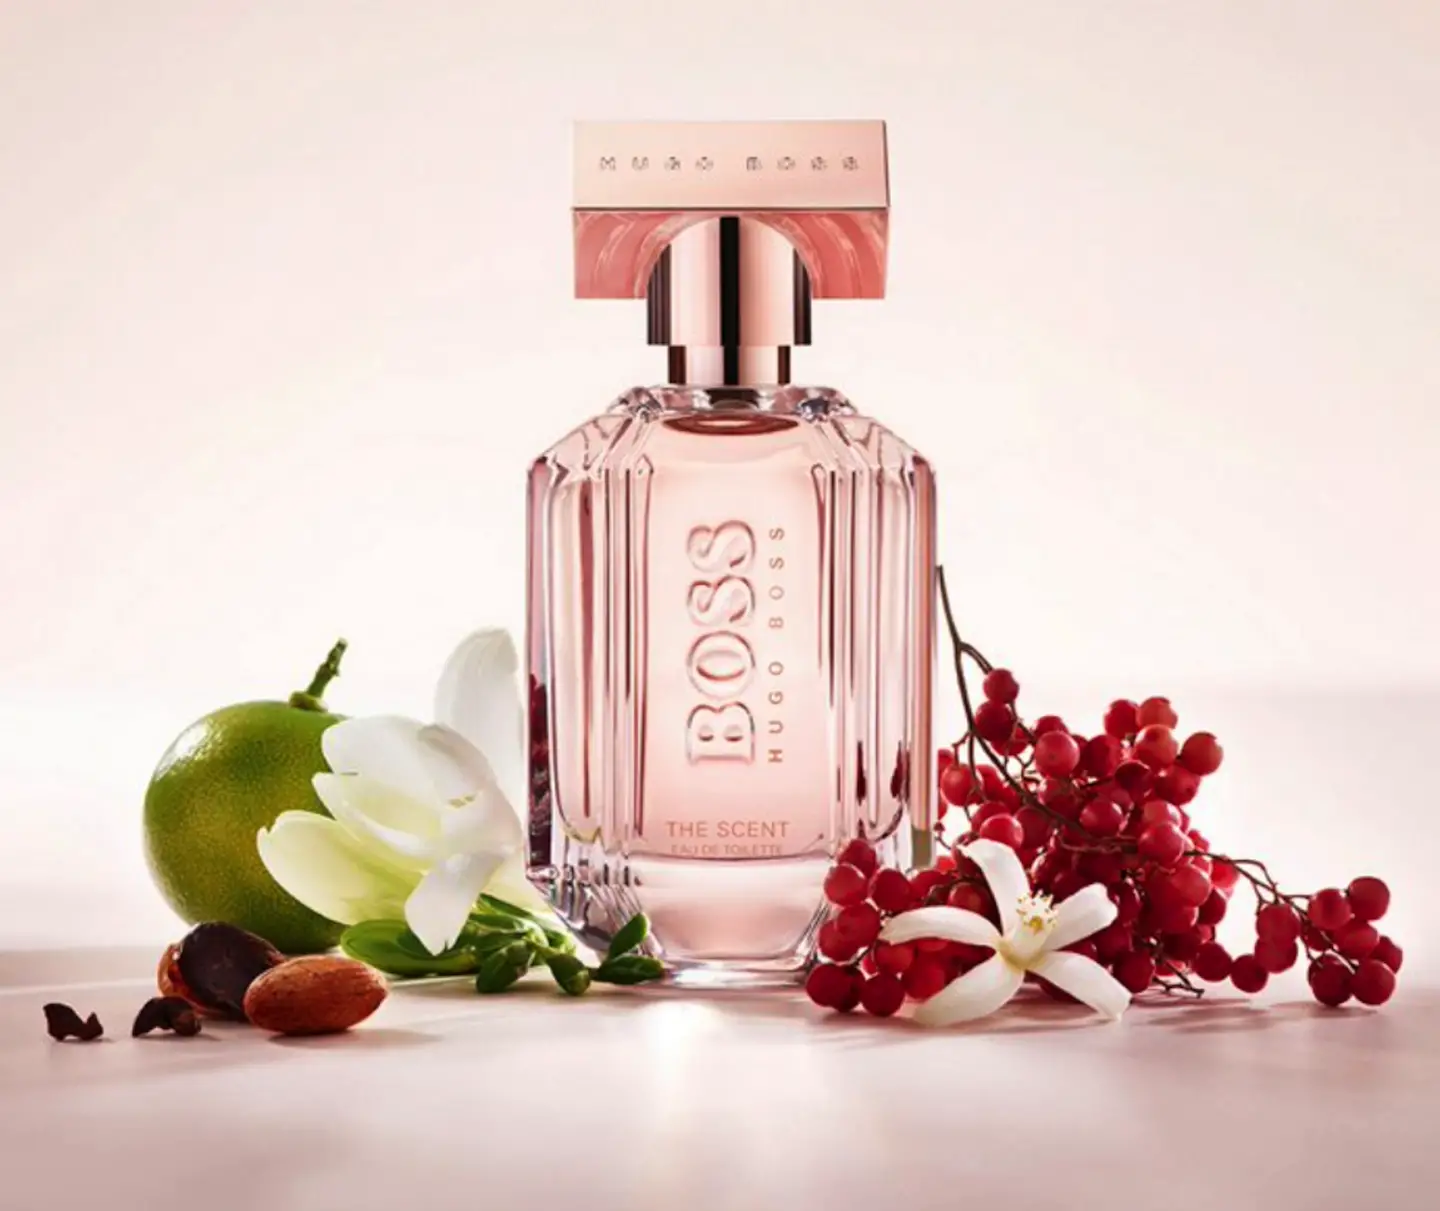 Scent. Hugo Boss the Scent for her. Духи Hugo Boss the Scent. Хуго босс the Scent for her. Духи Boss the Scent for her.